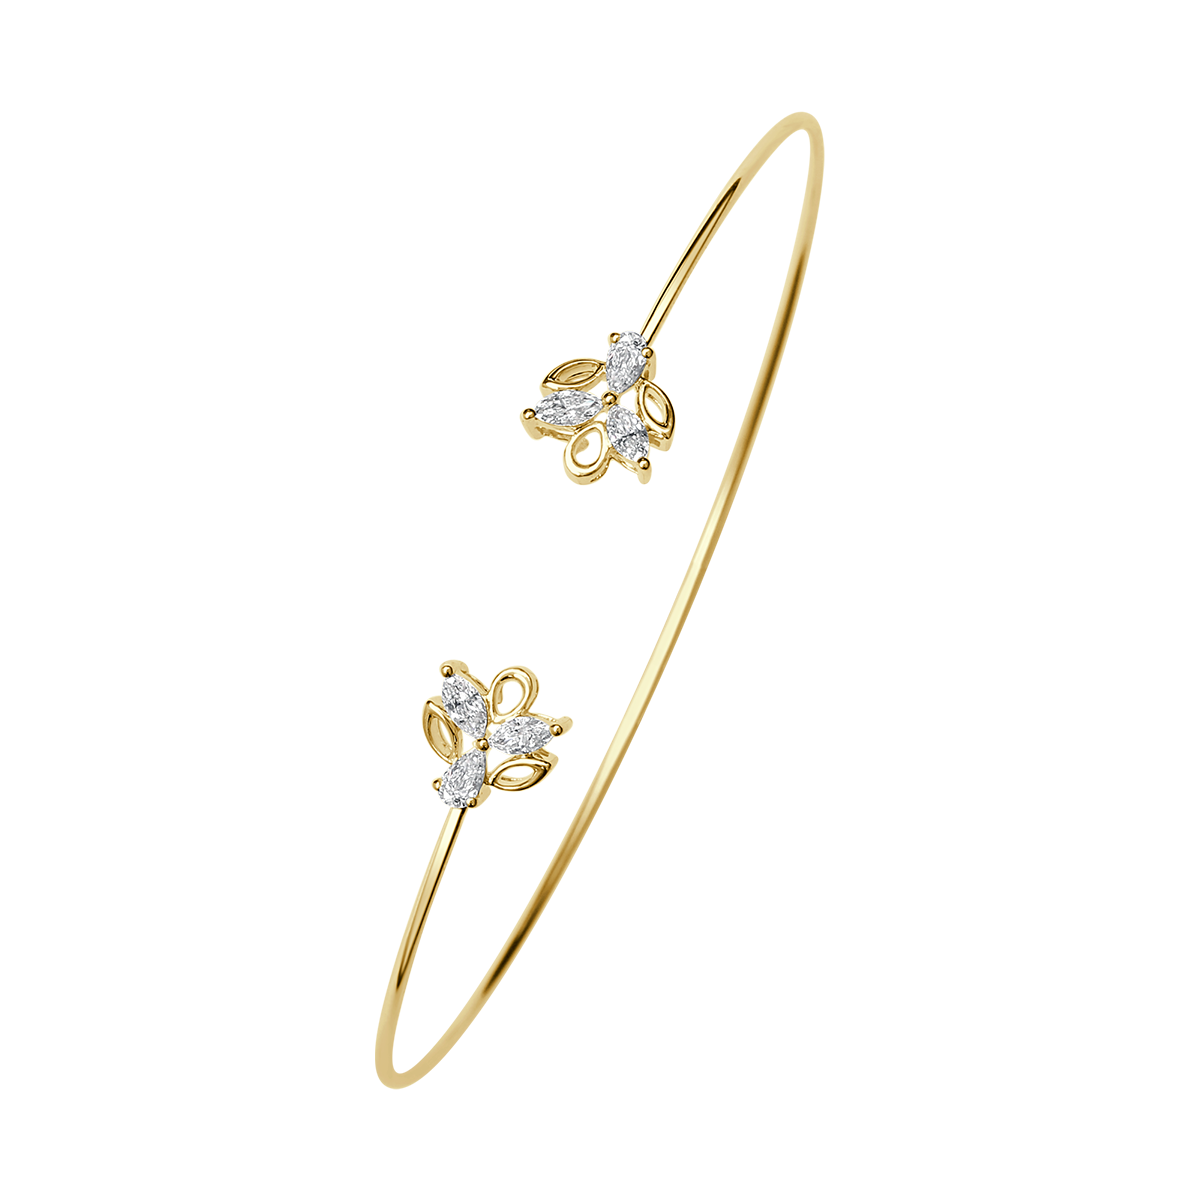 Alternate Diamond Leaves Bangle From Ava Collection